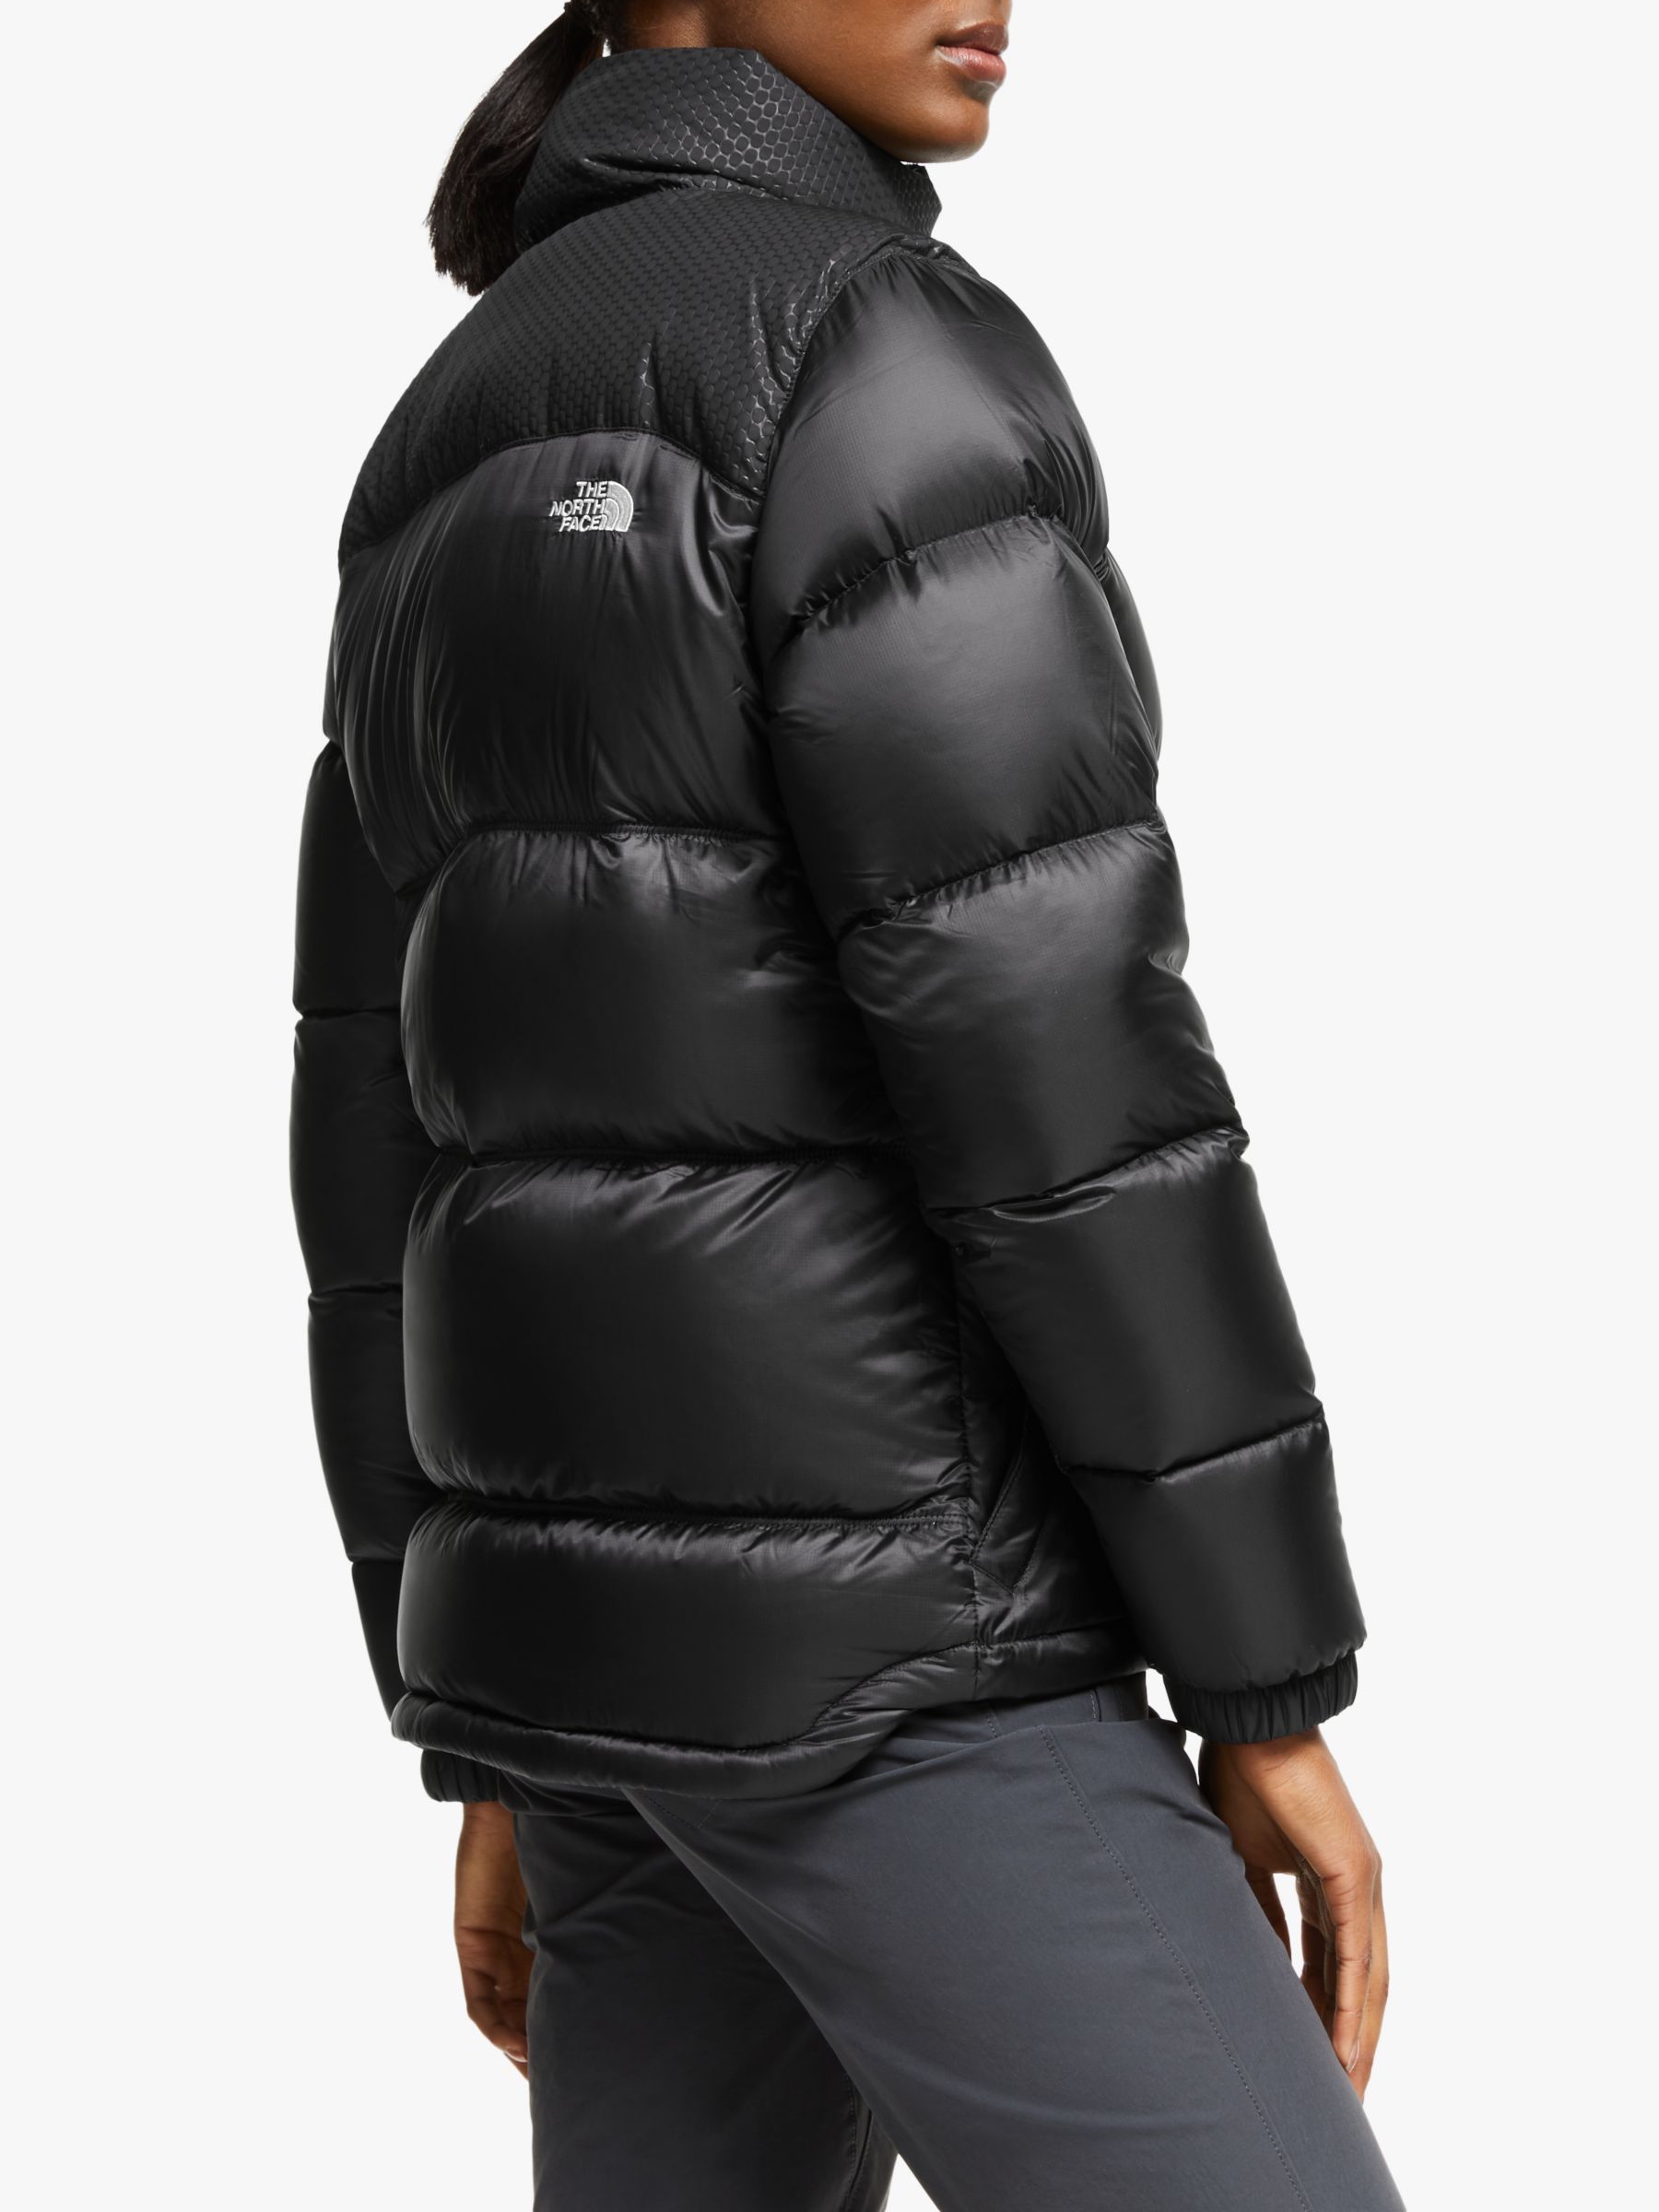 north face brown puffer coat